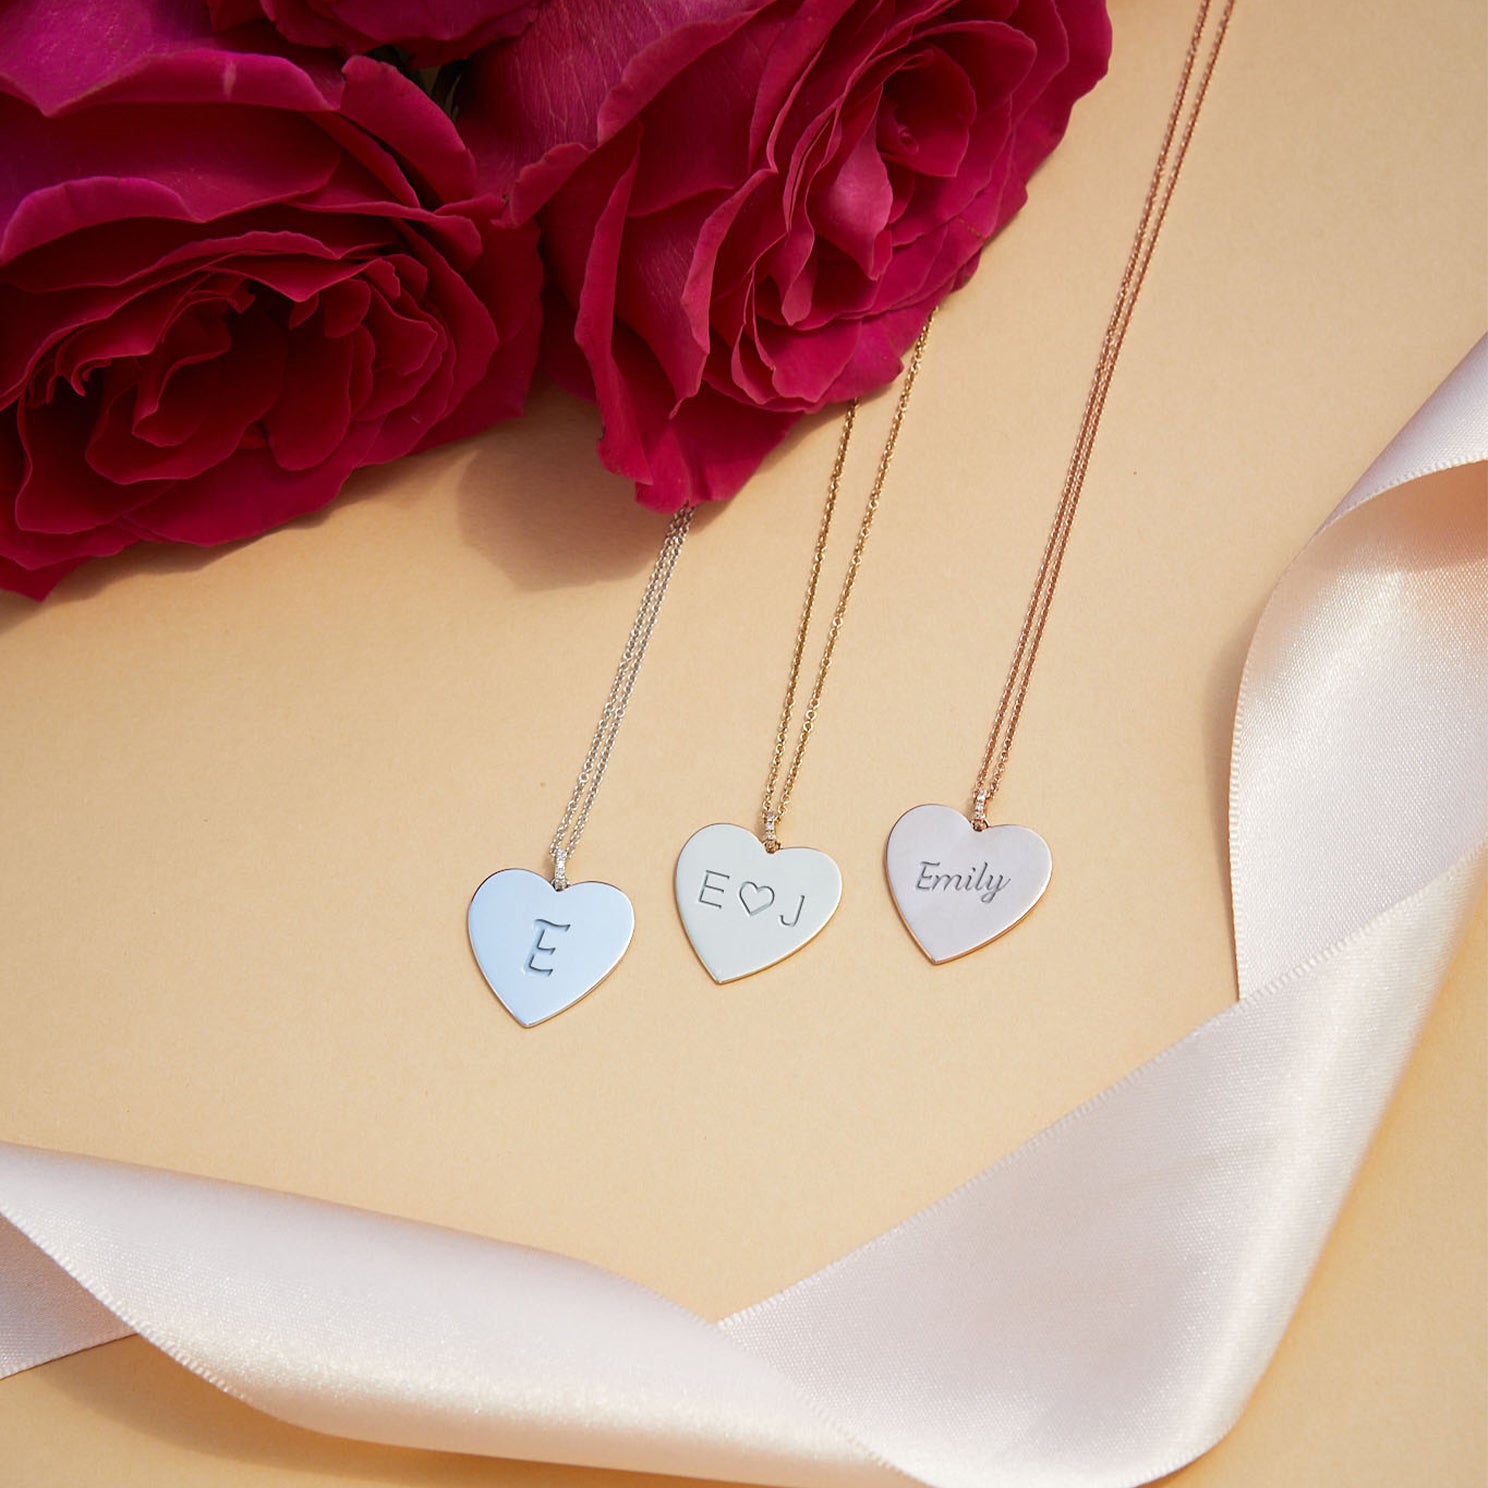 Gold Jumbo Heart Necklace in 14k yellow gold, white gold, and rose gold engraved with initials E, E heart J, Emily